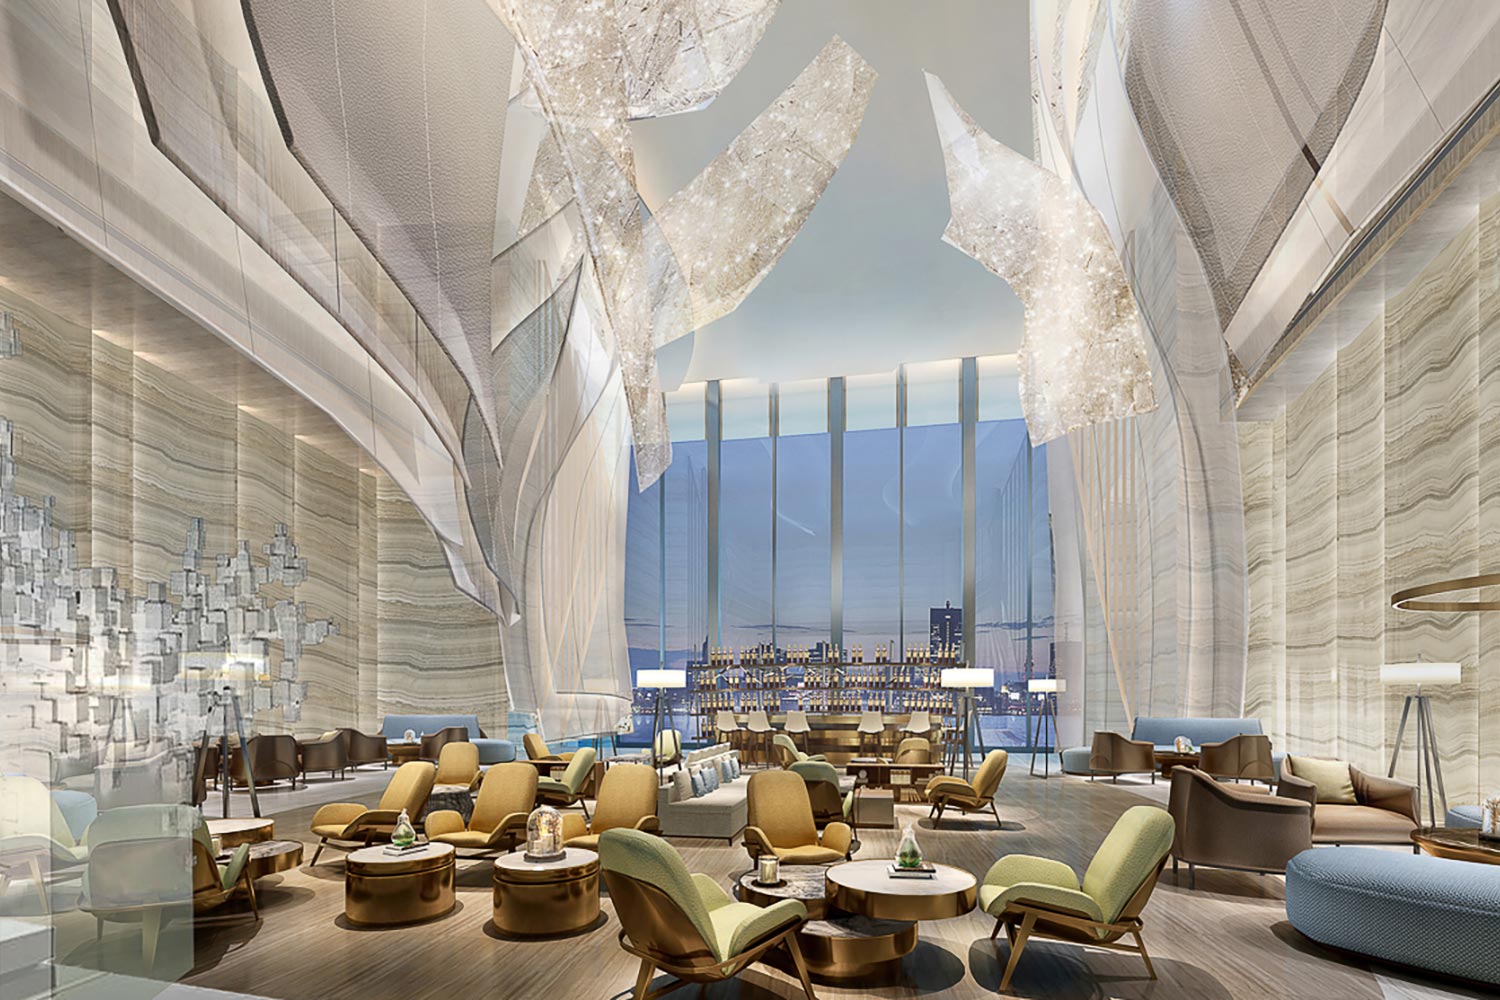 The Hilton Quanzhou Riverside in China with class sculptures coming off of the walls